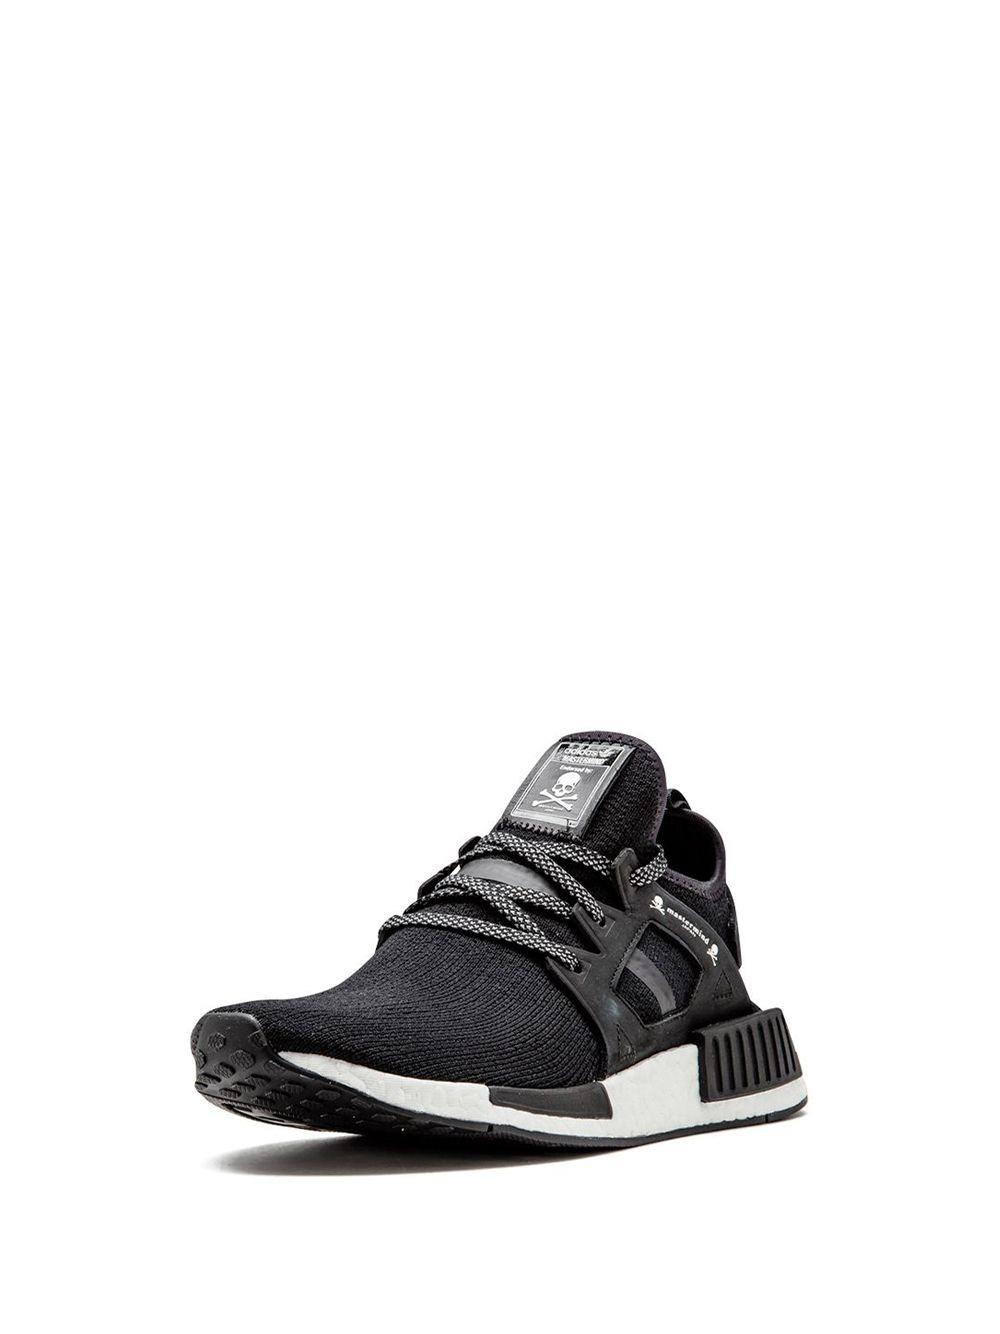 adidas Nmd Xr1 Mmj 'mastermind Japan' Shoes in Black for Men - Save 23% |  Lyst